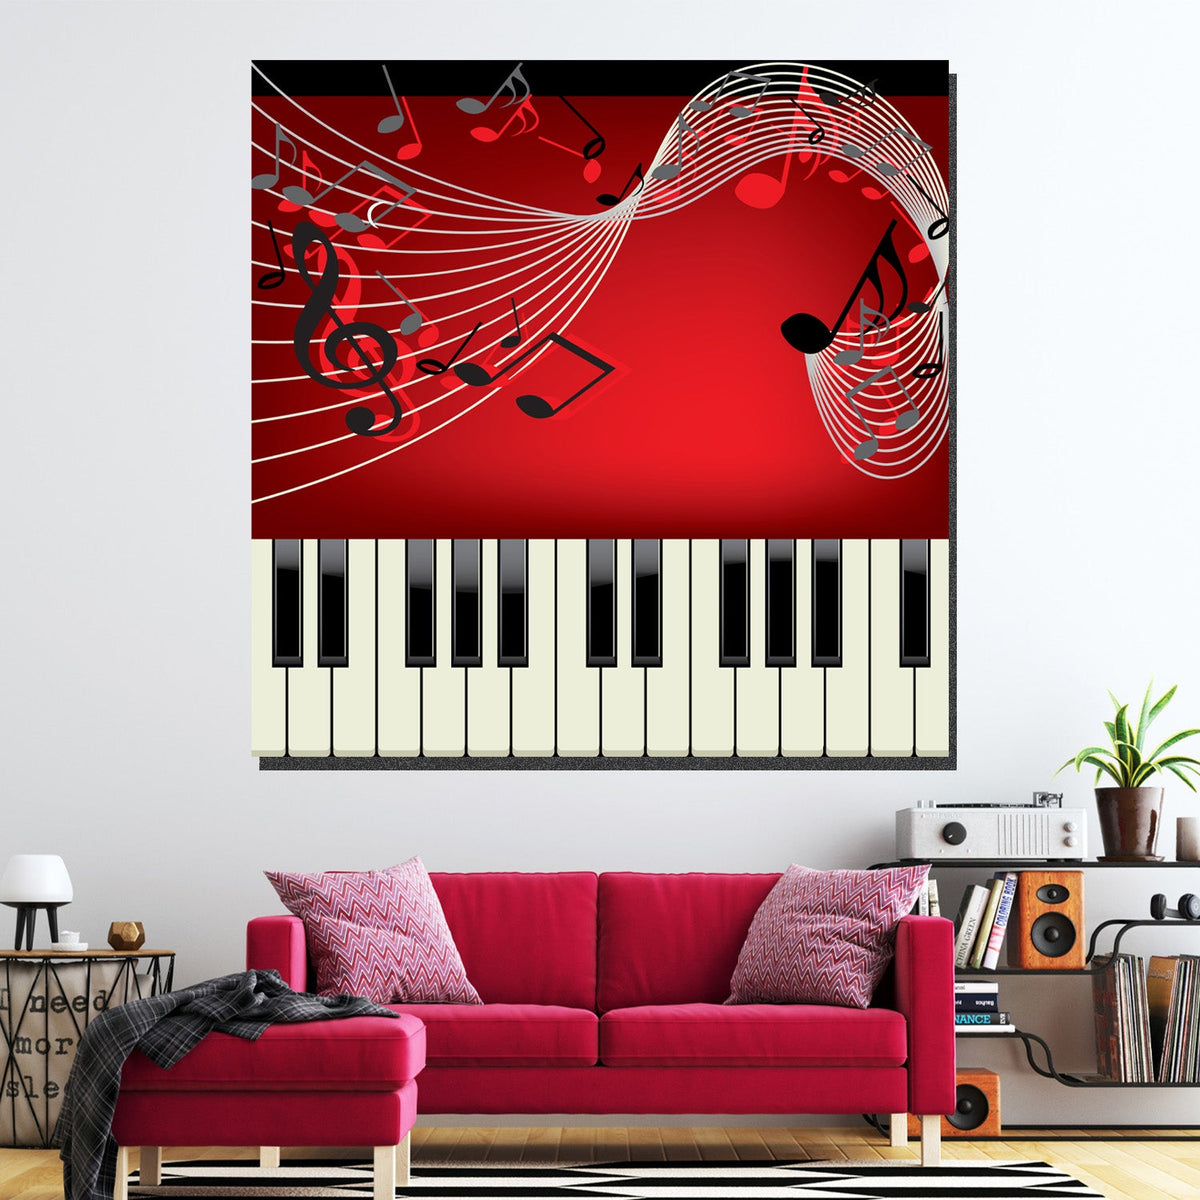 https://cdn.shopify.com/s/files/1/0387/9986/8044/products/PianoandMusicalNotesCanvasArtprintStretched-4.jpg